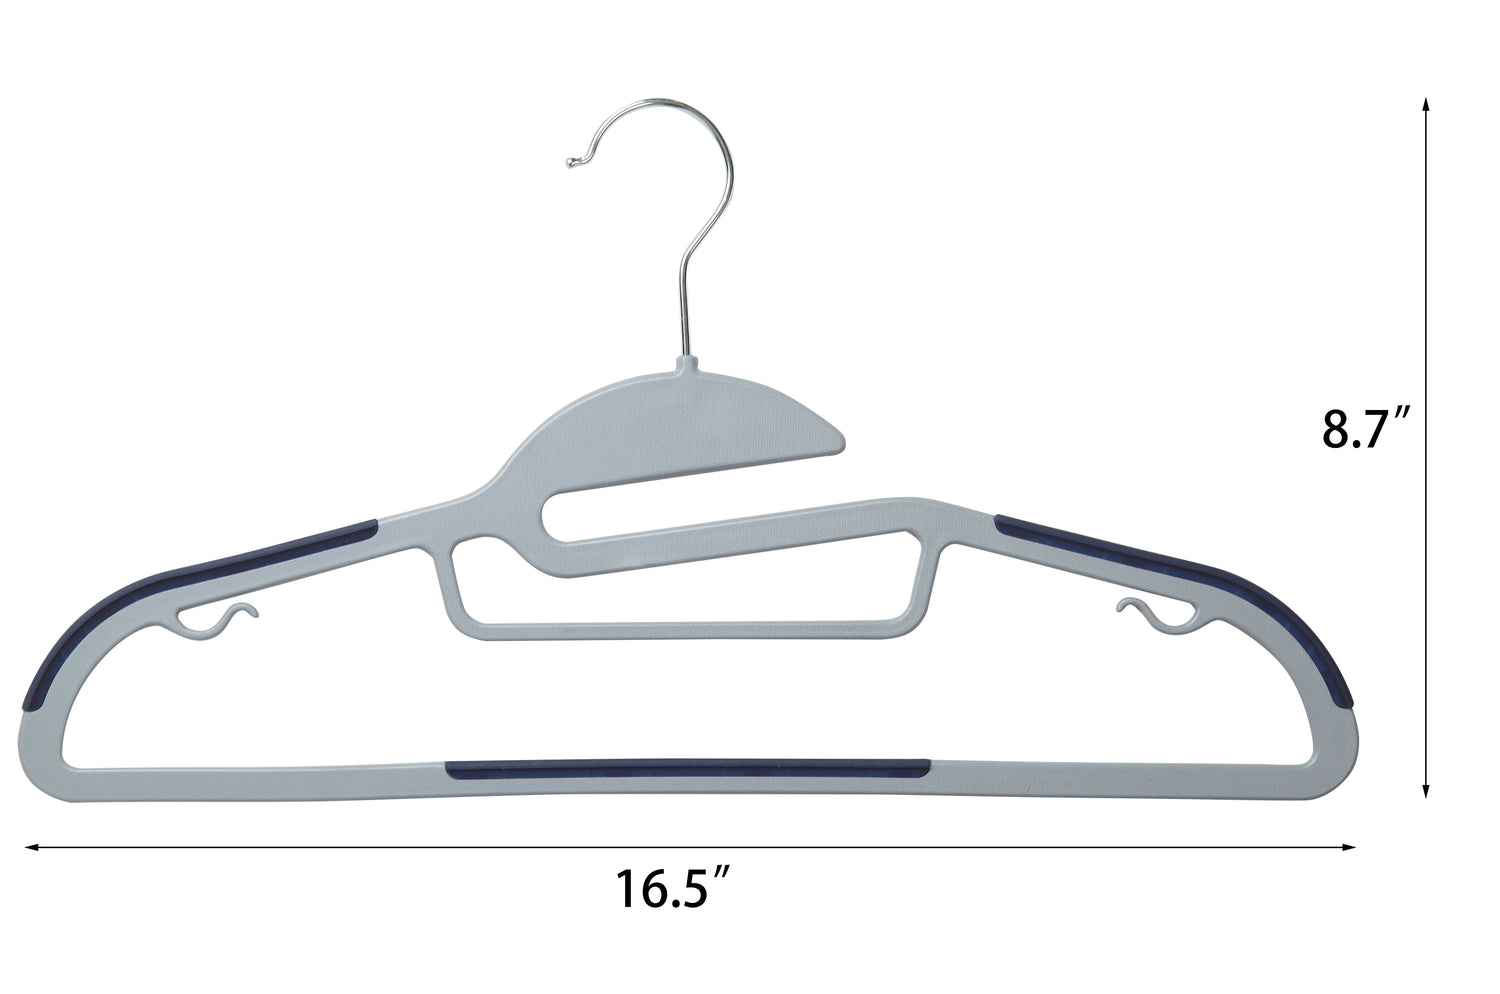 Heavy Duty Plastic Hangers 50 Pack with Non-Slip Design,0.2 Inches  Thick,360°Swivel Hook Space Saving Organizer for Bedroom  Closet,Shirts,Pants,Strong